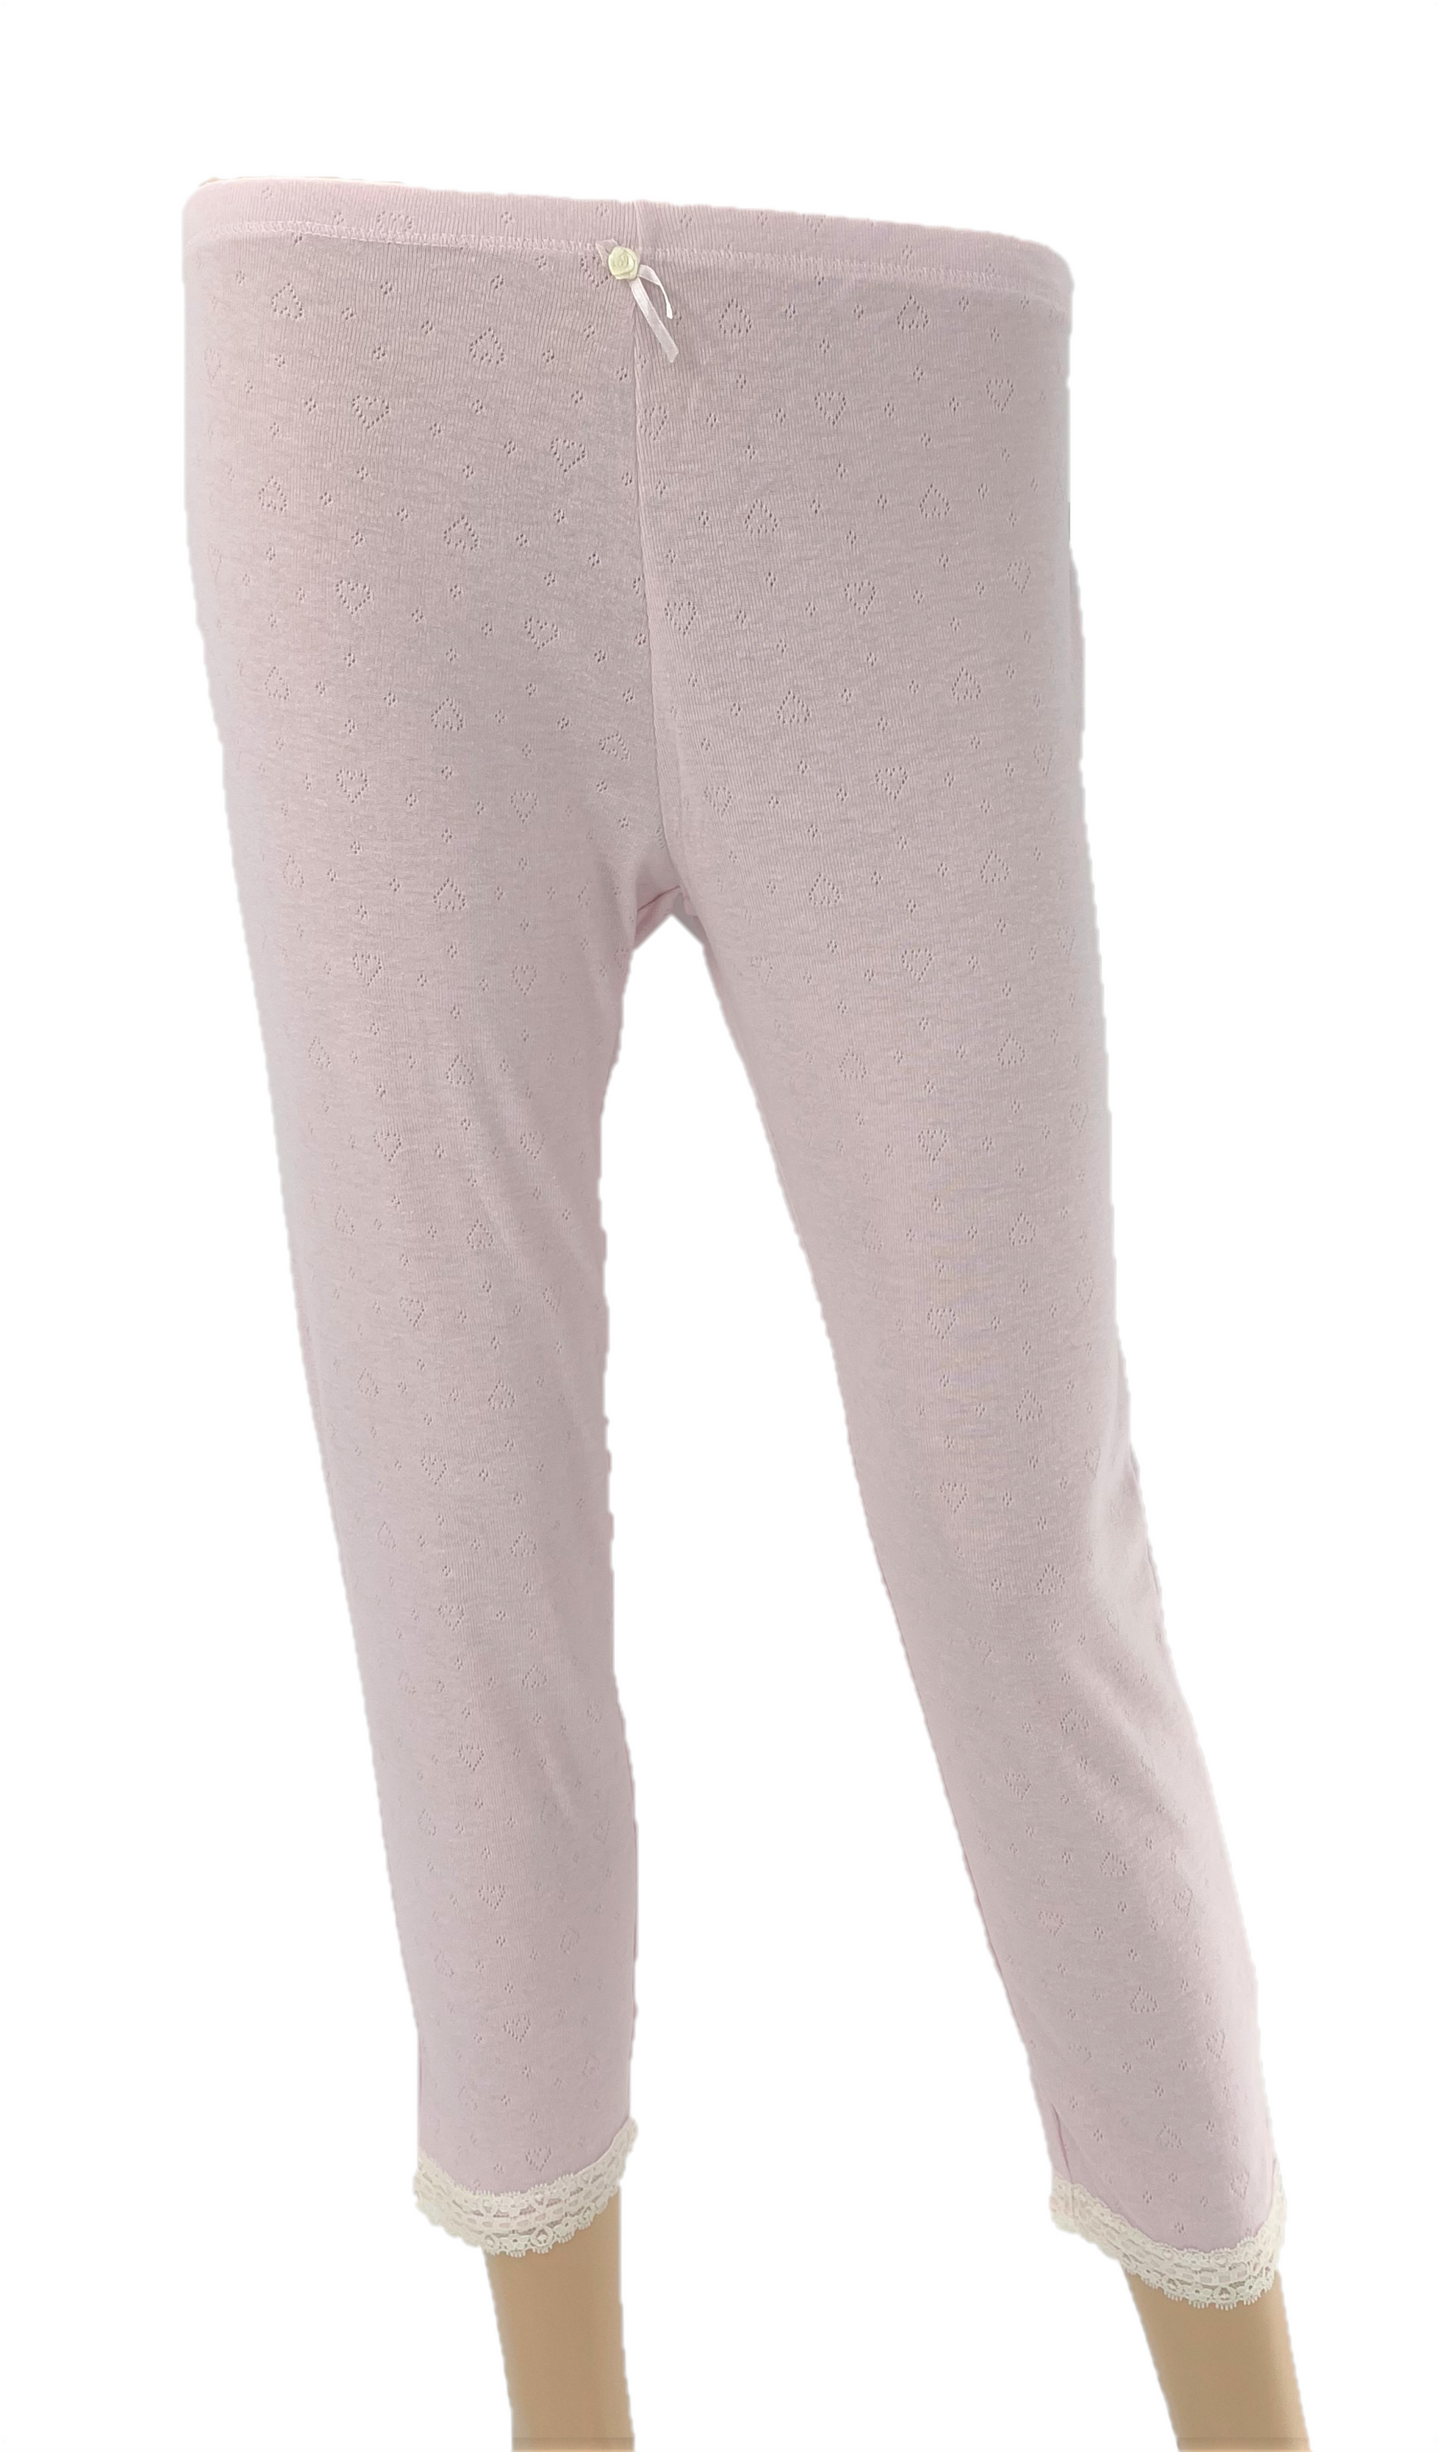 Ladies Thermal Lace Trimmed Pants- 3 Colours, 3 Sizes to choose